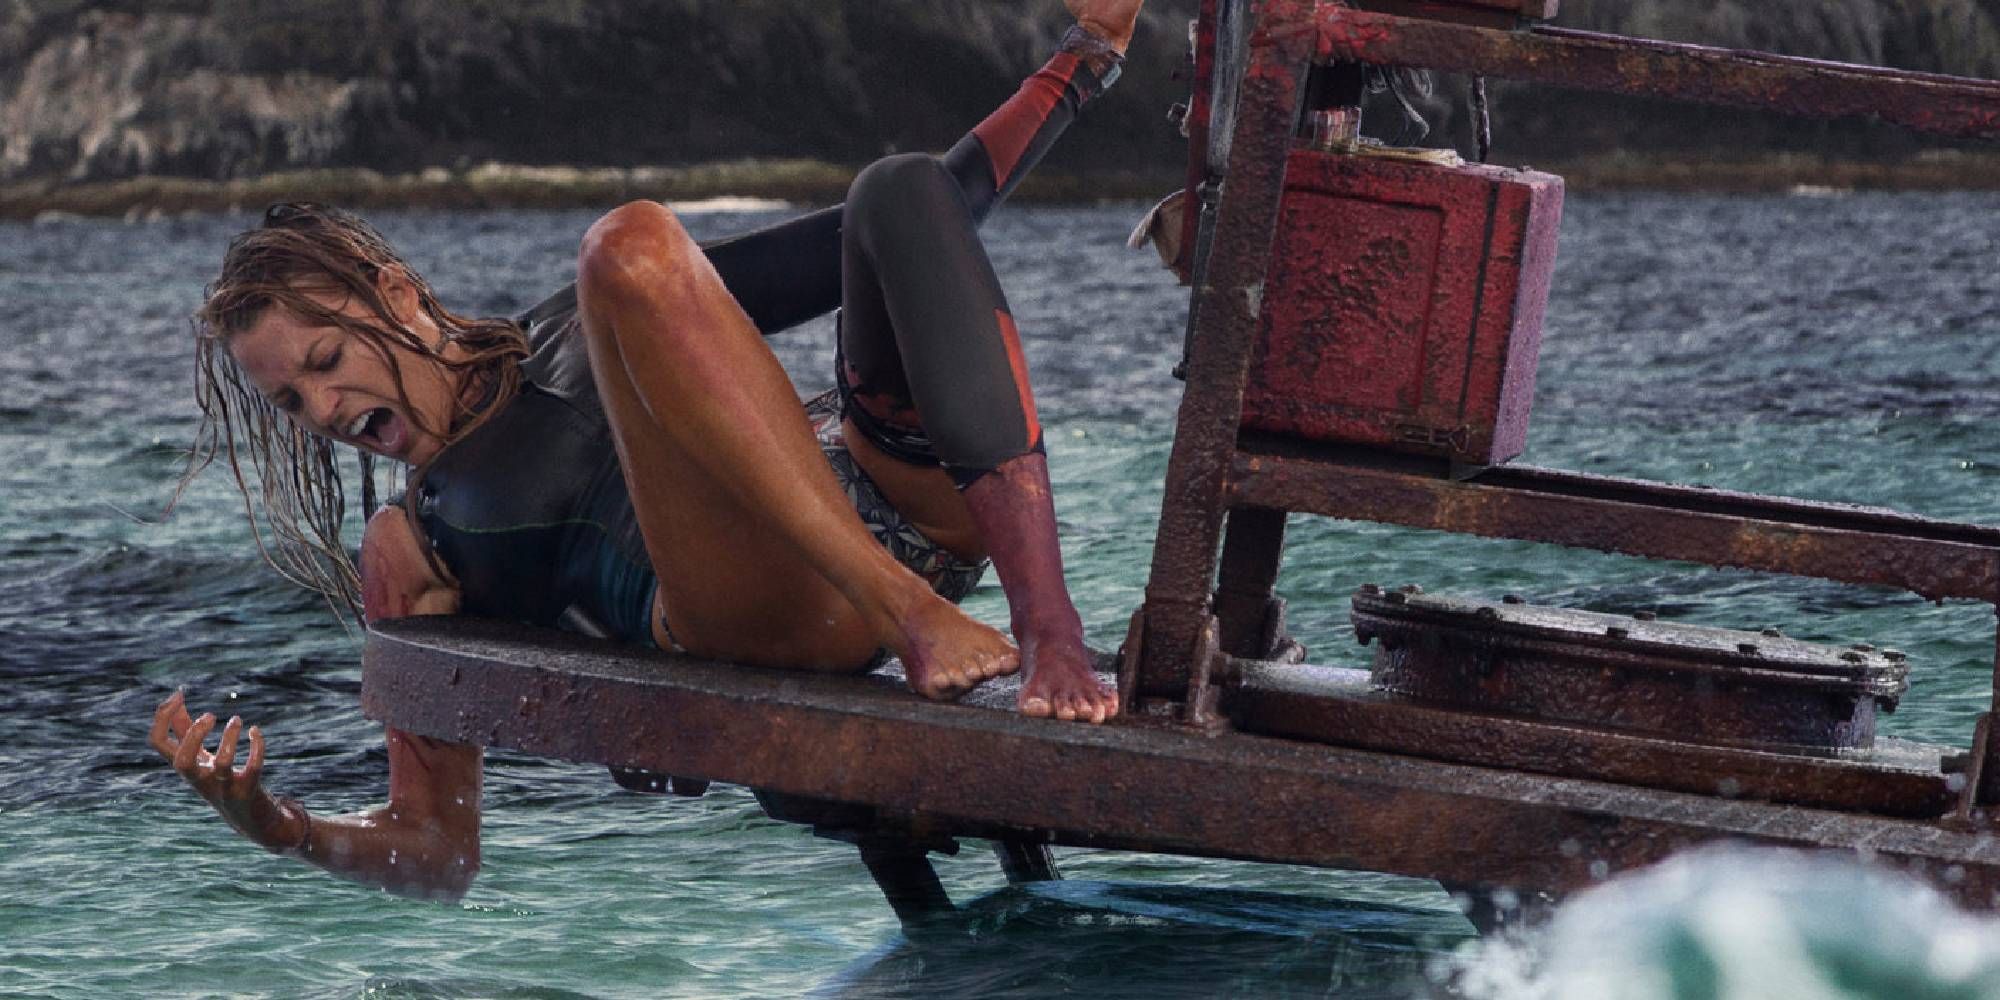 Blake Lively injured and screaming in The Shallows